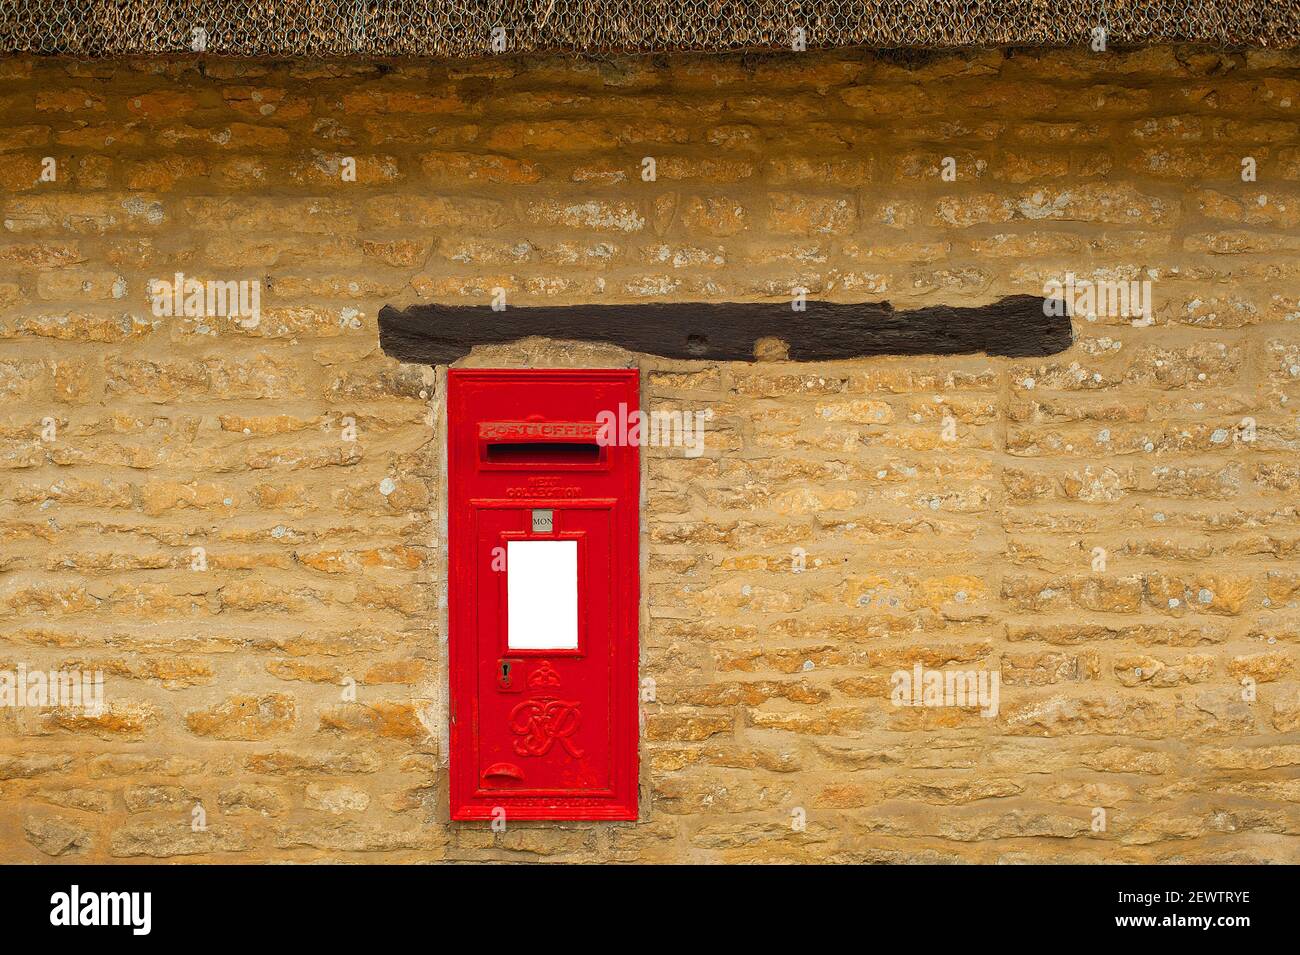 Red Post box built Into Sandstone Wall Stock Photo